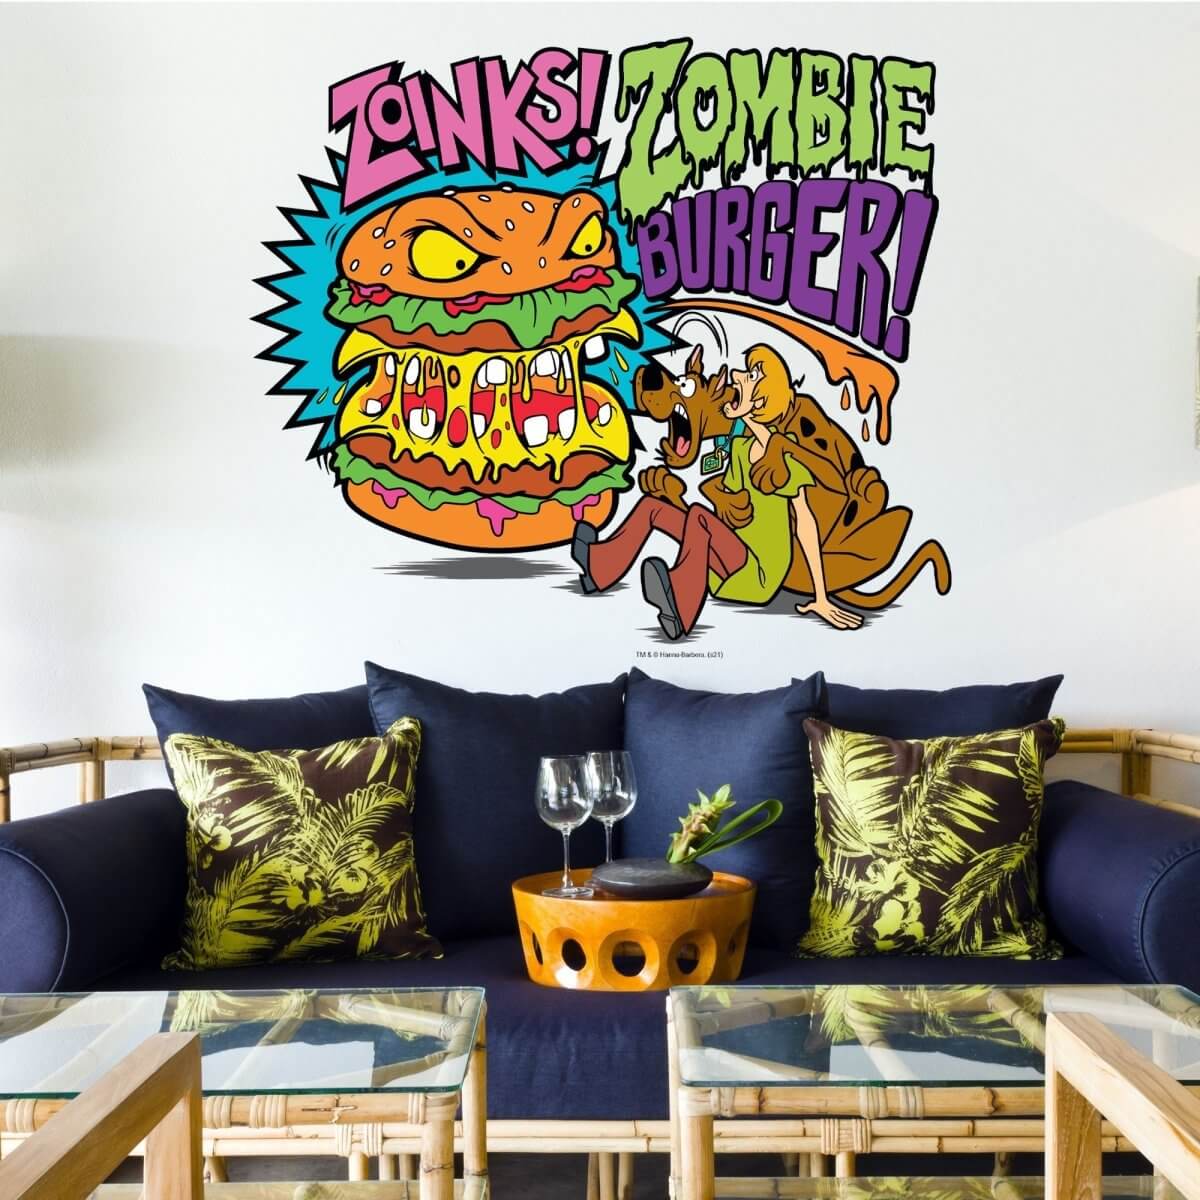 Kismet Decals Home & Room Decor Scooby-Doo and the Zombie Burger Wall decal sticker - officially licensed - latex printed with no solvent odor - Kismet Decals